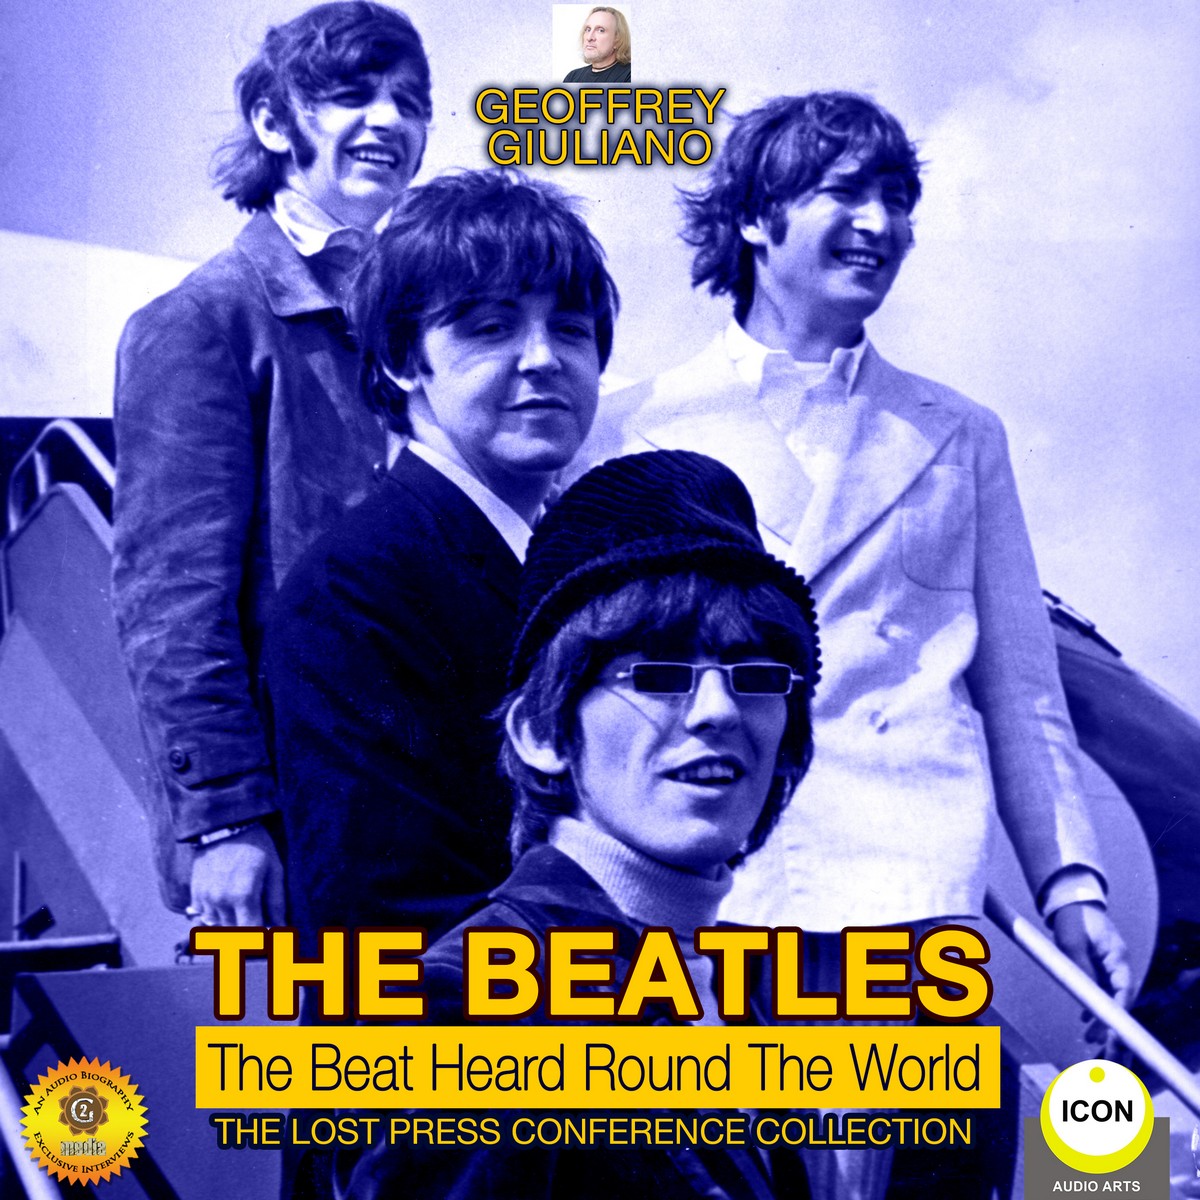 The Beatles: The Beat Heard Round the World – The Lost Press Conference Collection